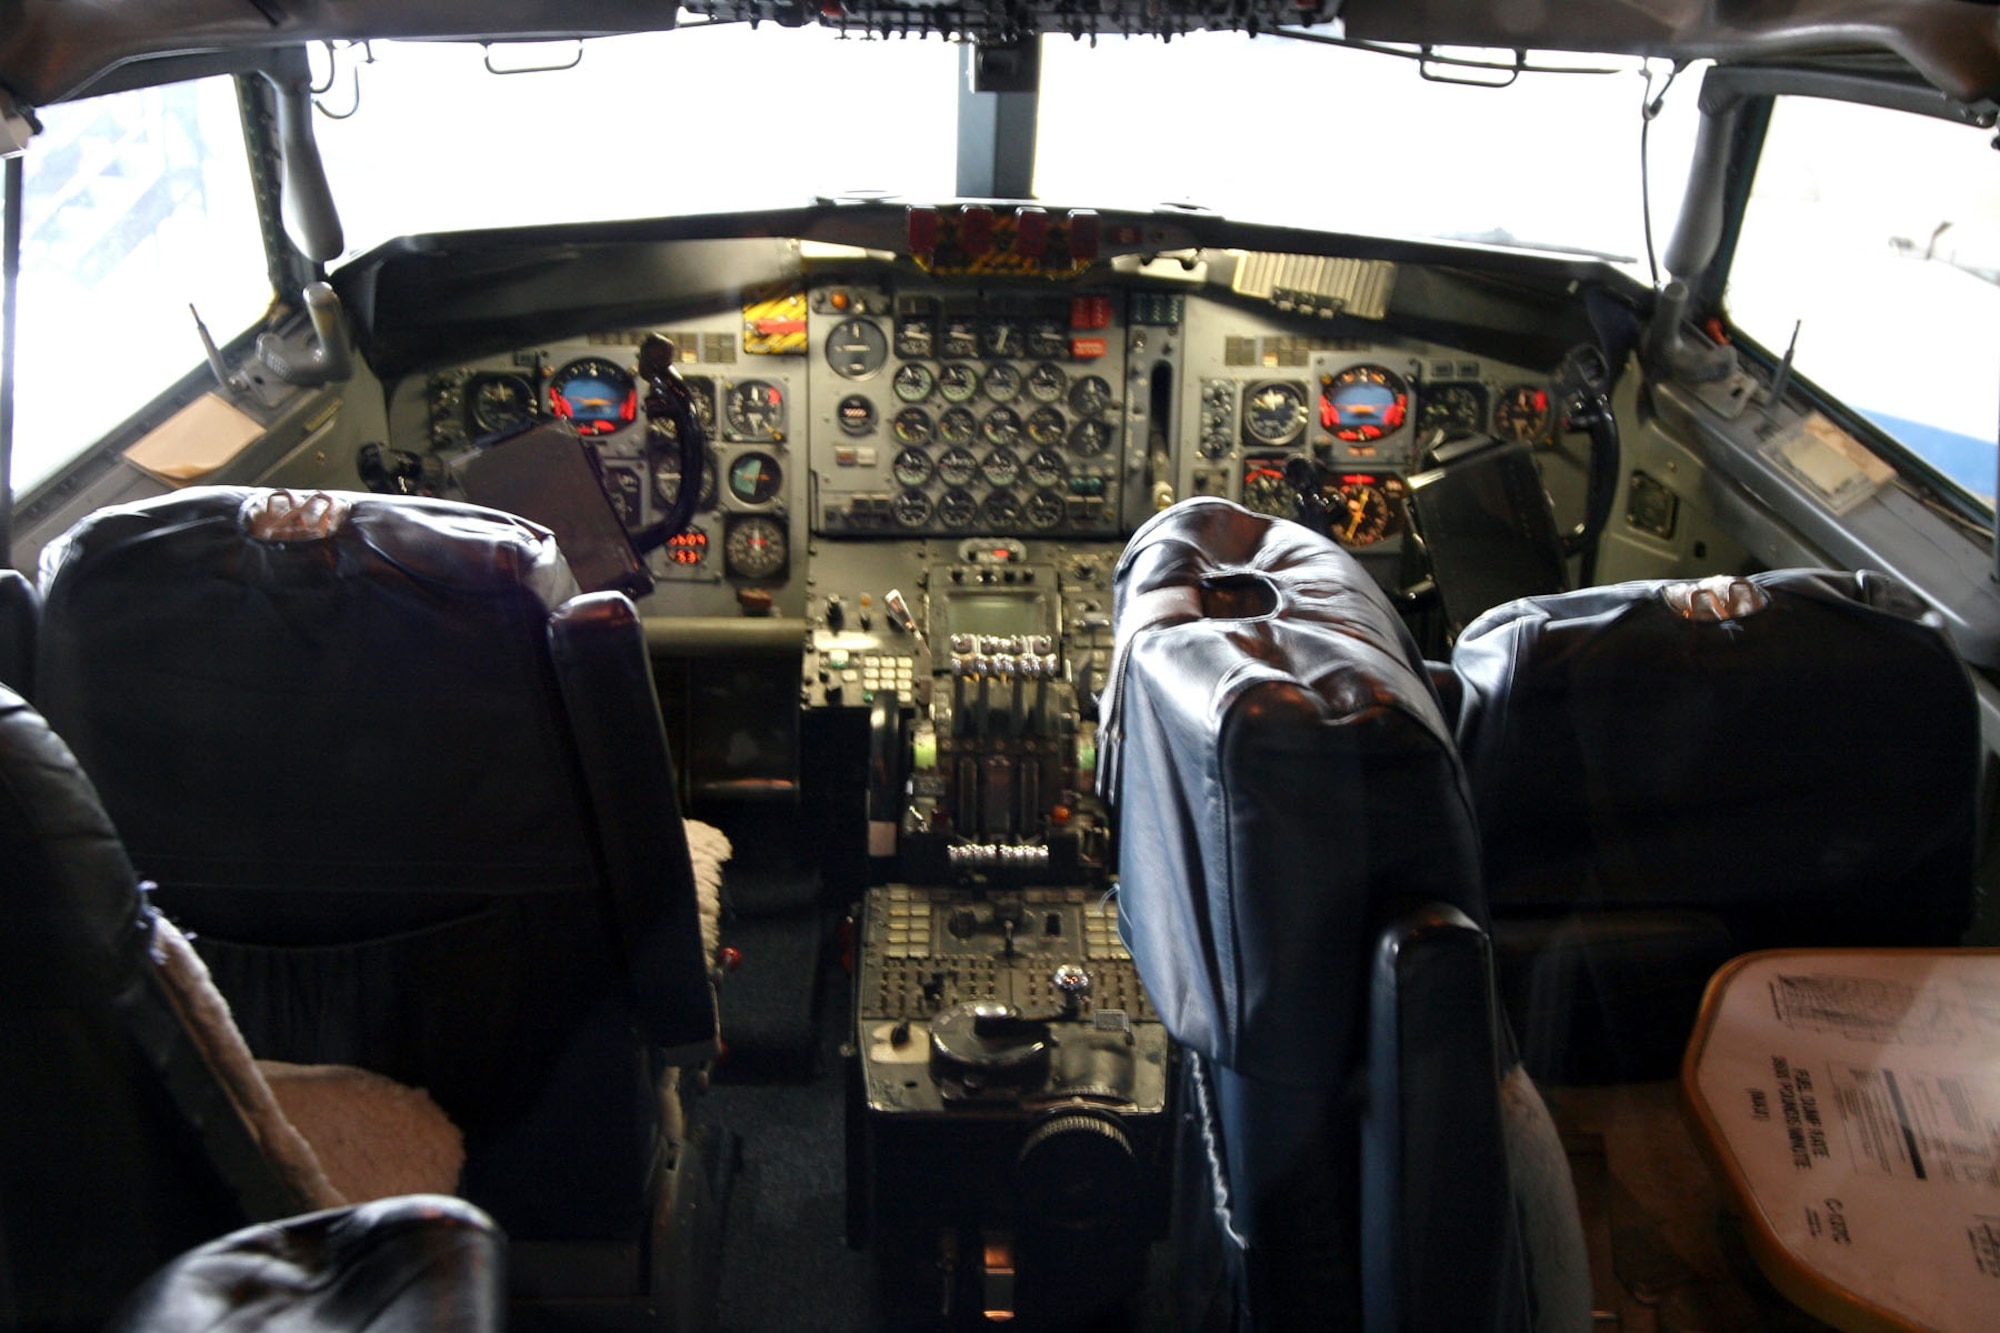 DAYTON, Ohio -- Boeing VC-137C SAM 26000 (Air Force One) cockpit at the National Museum of the United States Air Force. (Photo courtesy of Craig Scaling, Airshow Traveler)